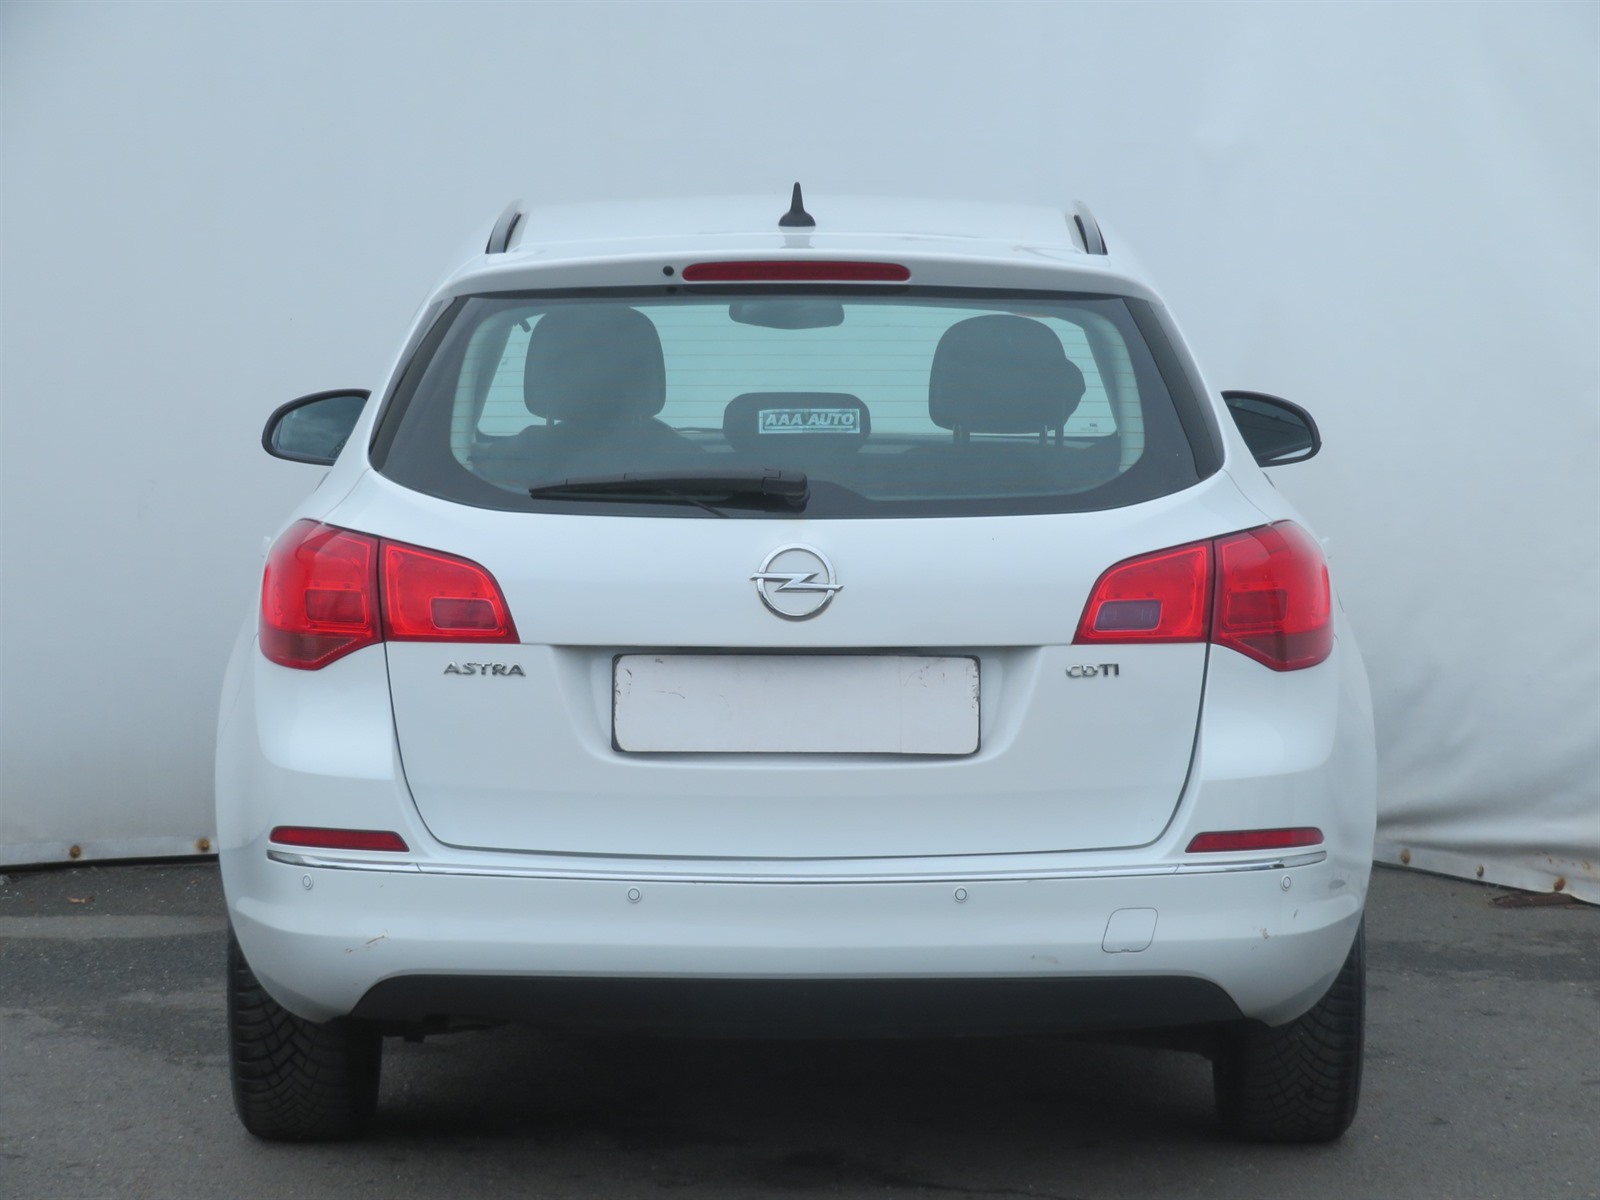 Opel Astra, 2014 - pohled č. 6